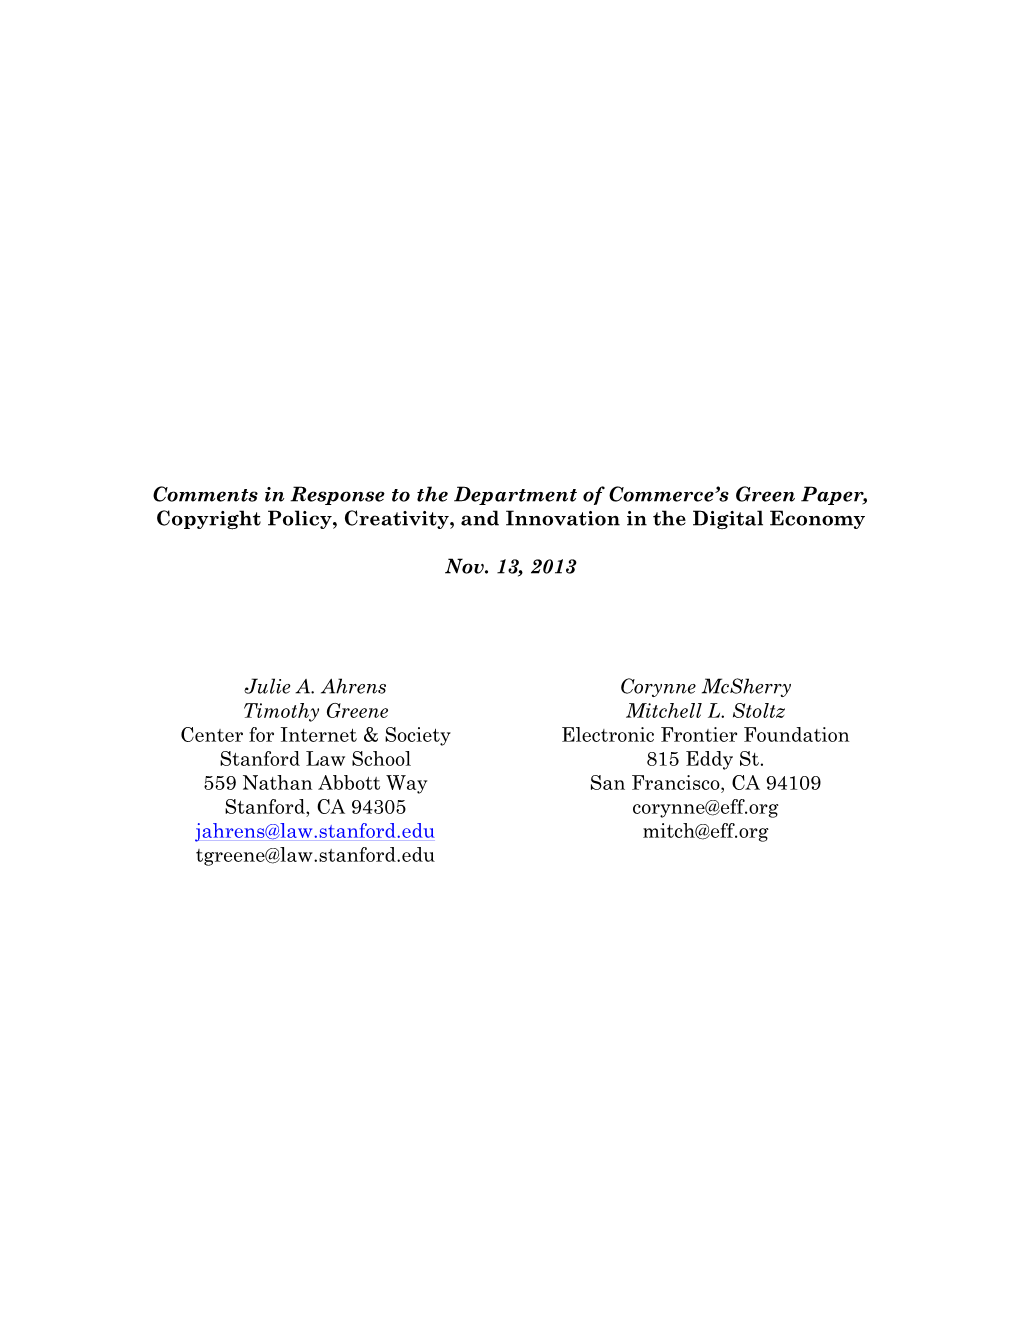 Comments in Response to the Department of Commerce's Green Paper, Copyright Policy, Creativity, and Innovation in the Digital